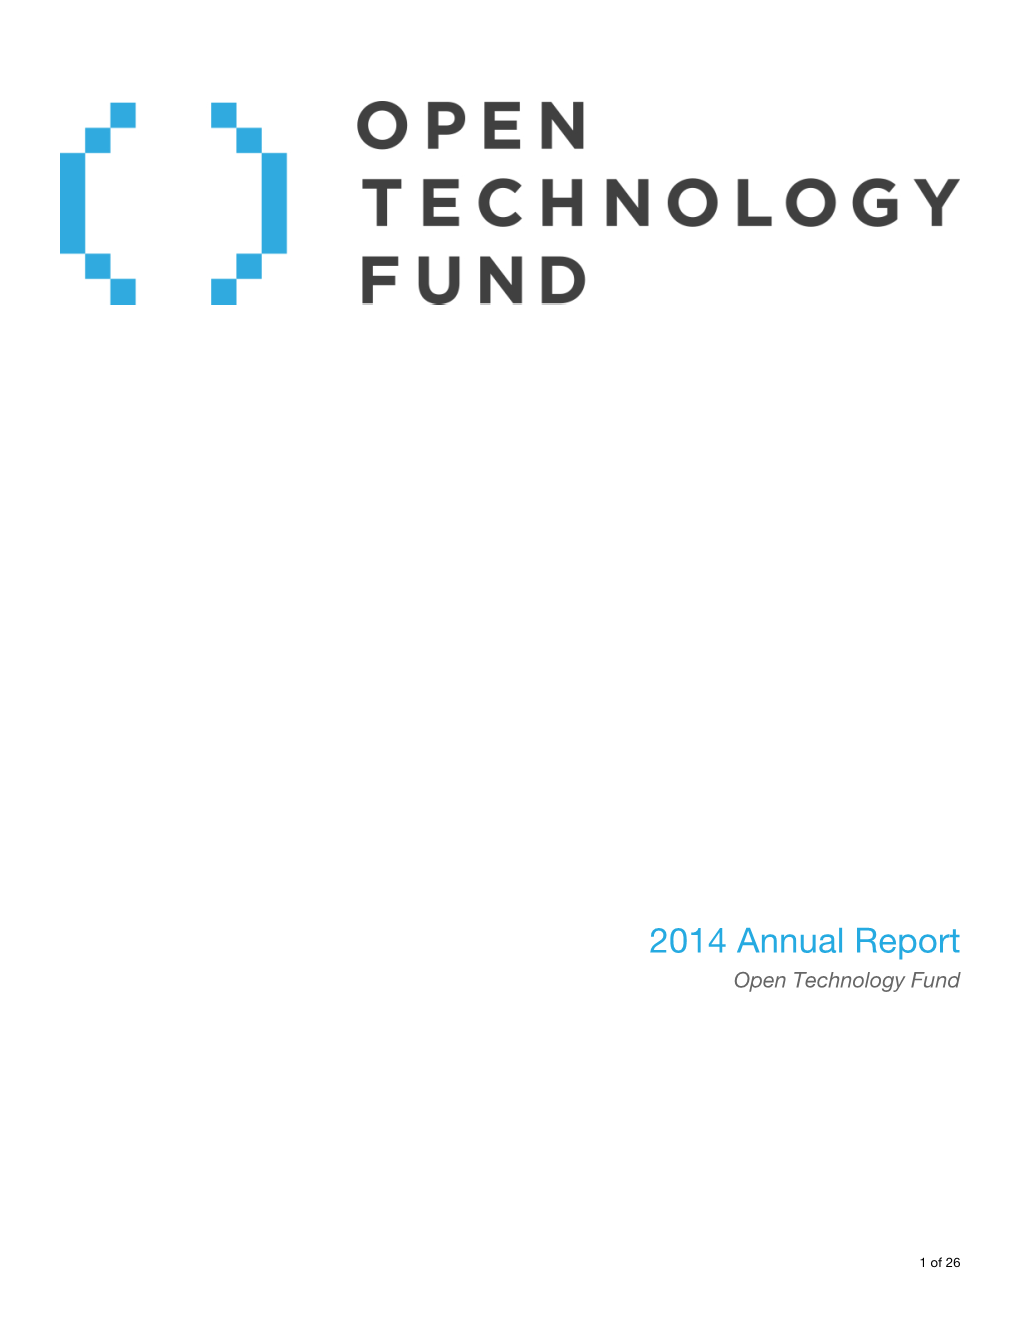 2014 Annual Report Open Technology Fund